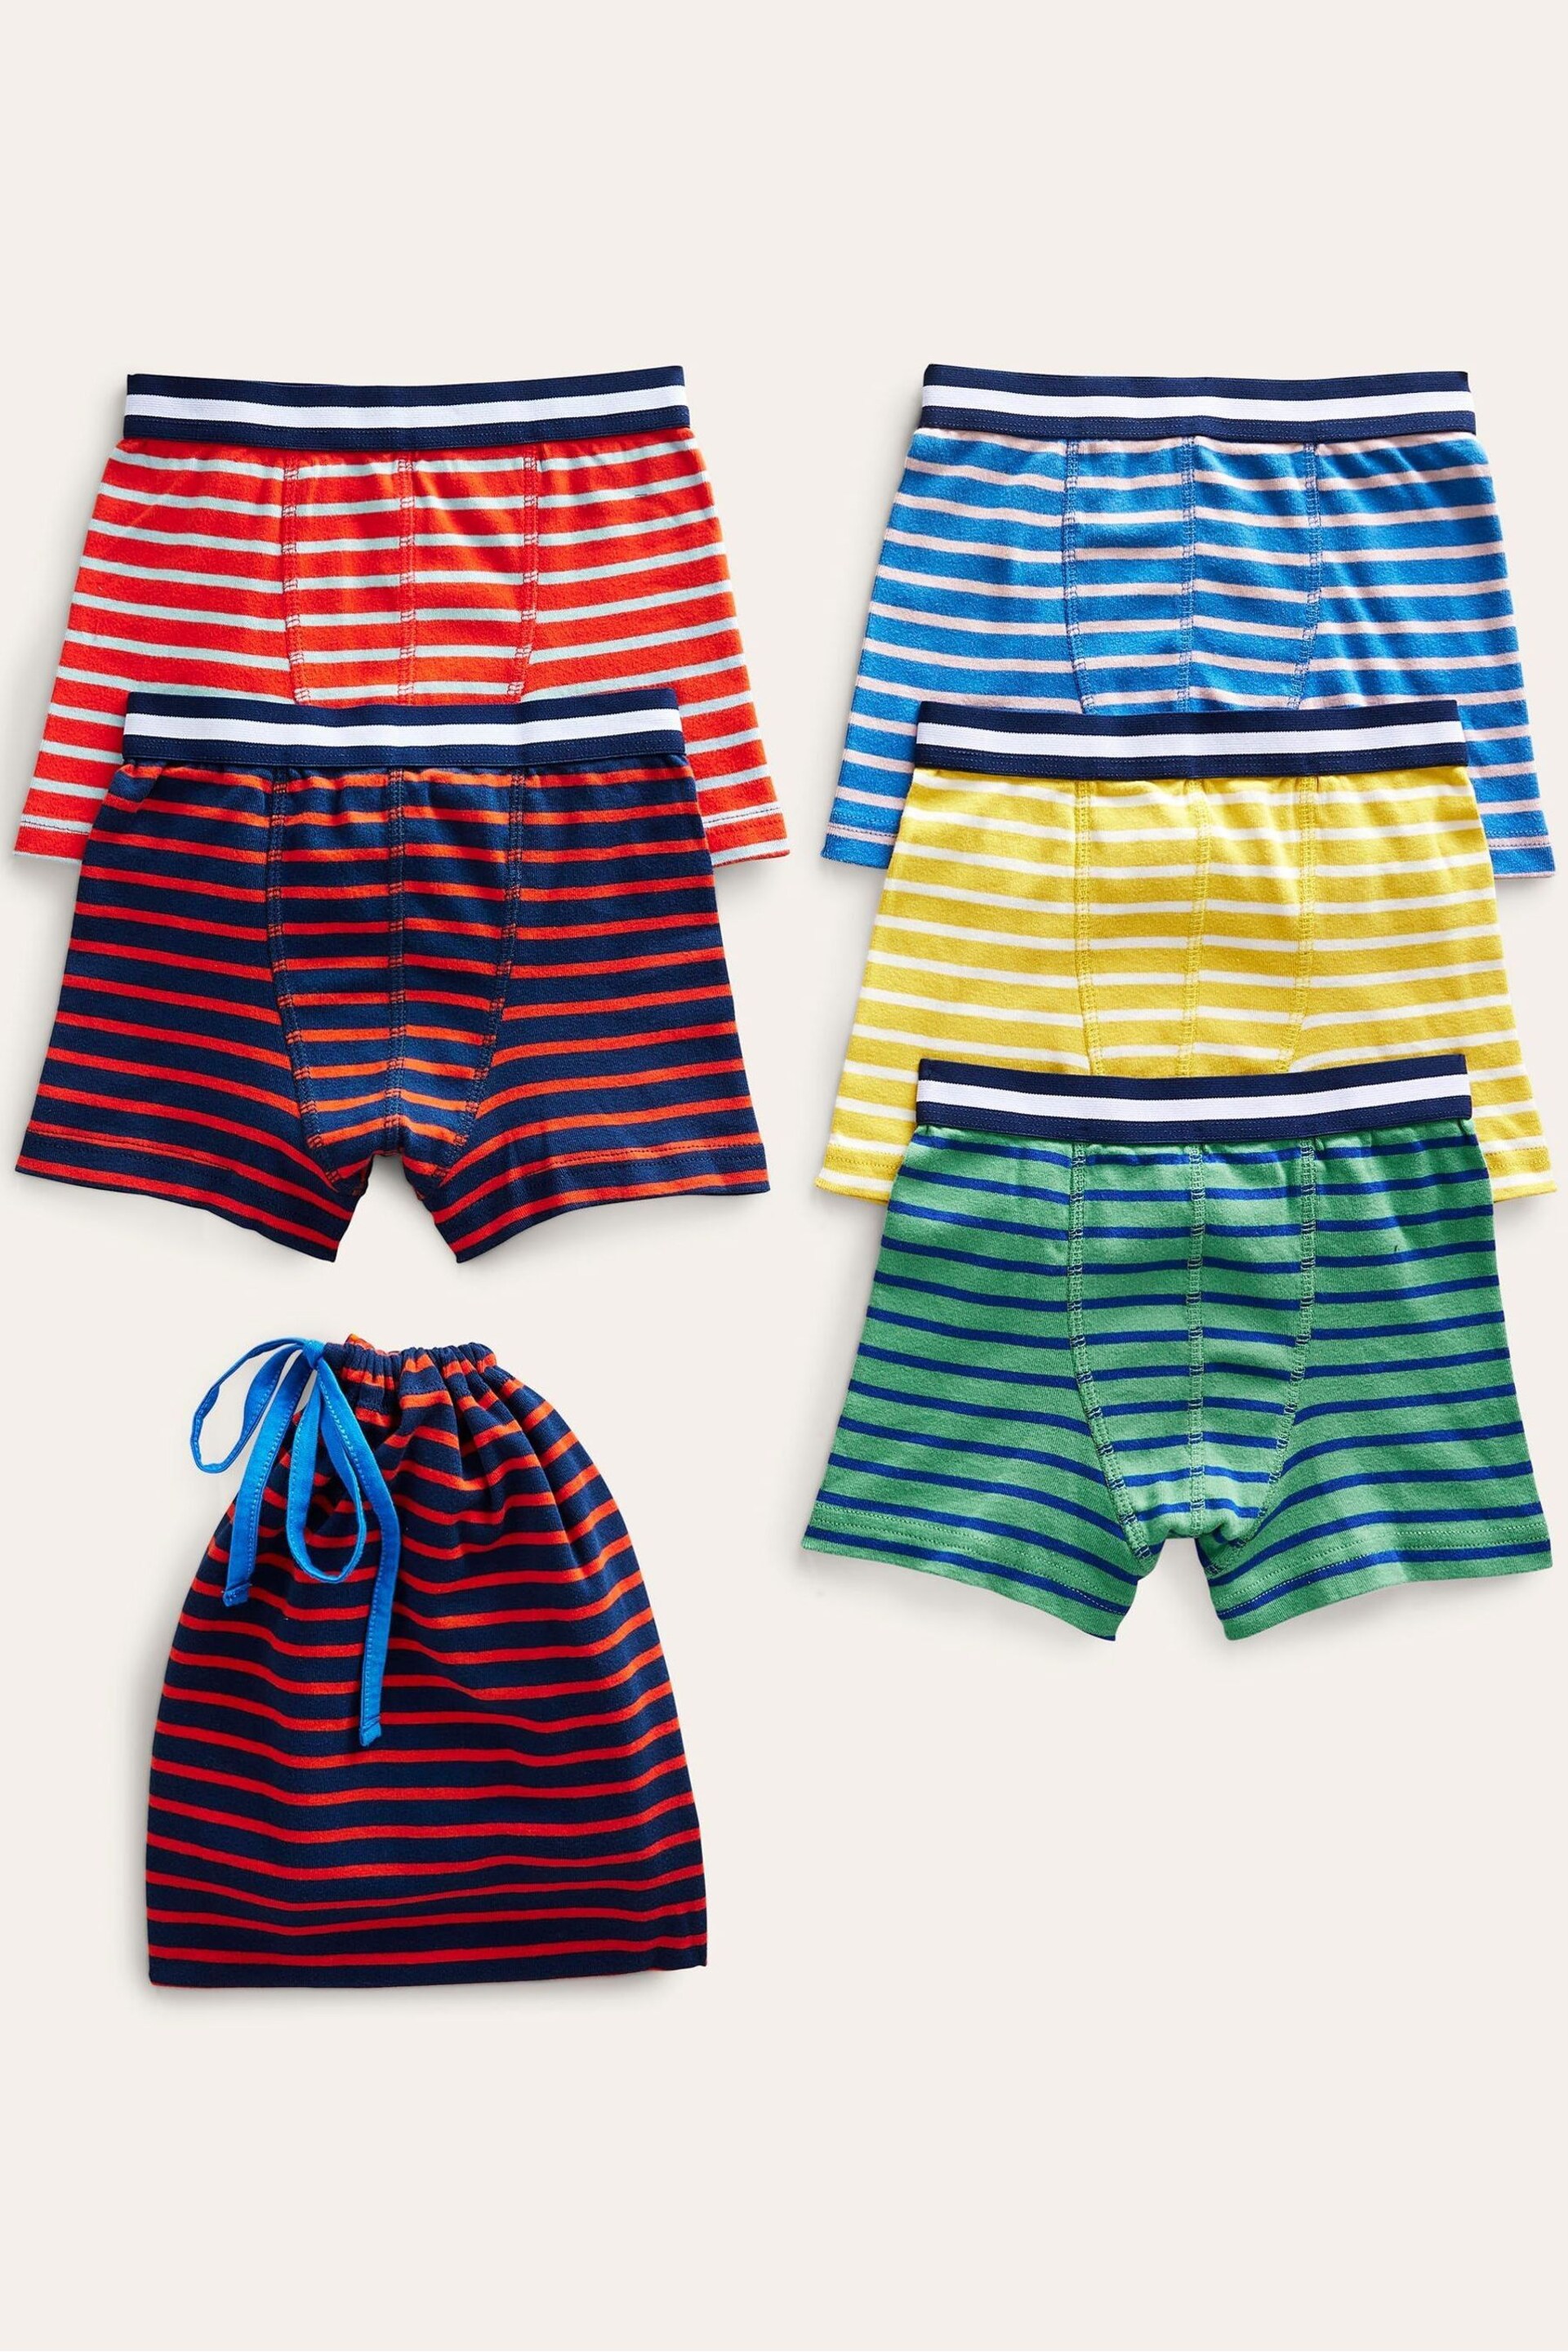 Boden Red Boxers 5 Pack - Image 1 of 3